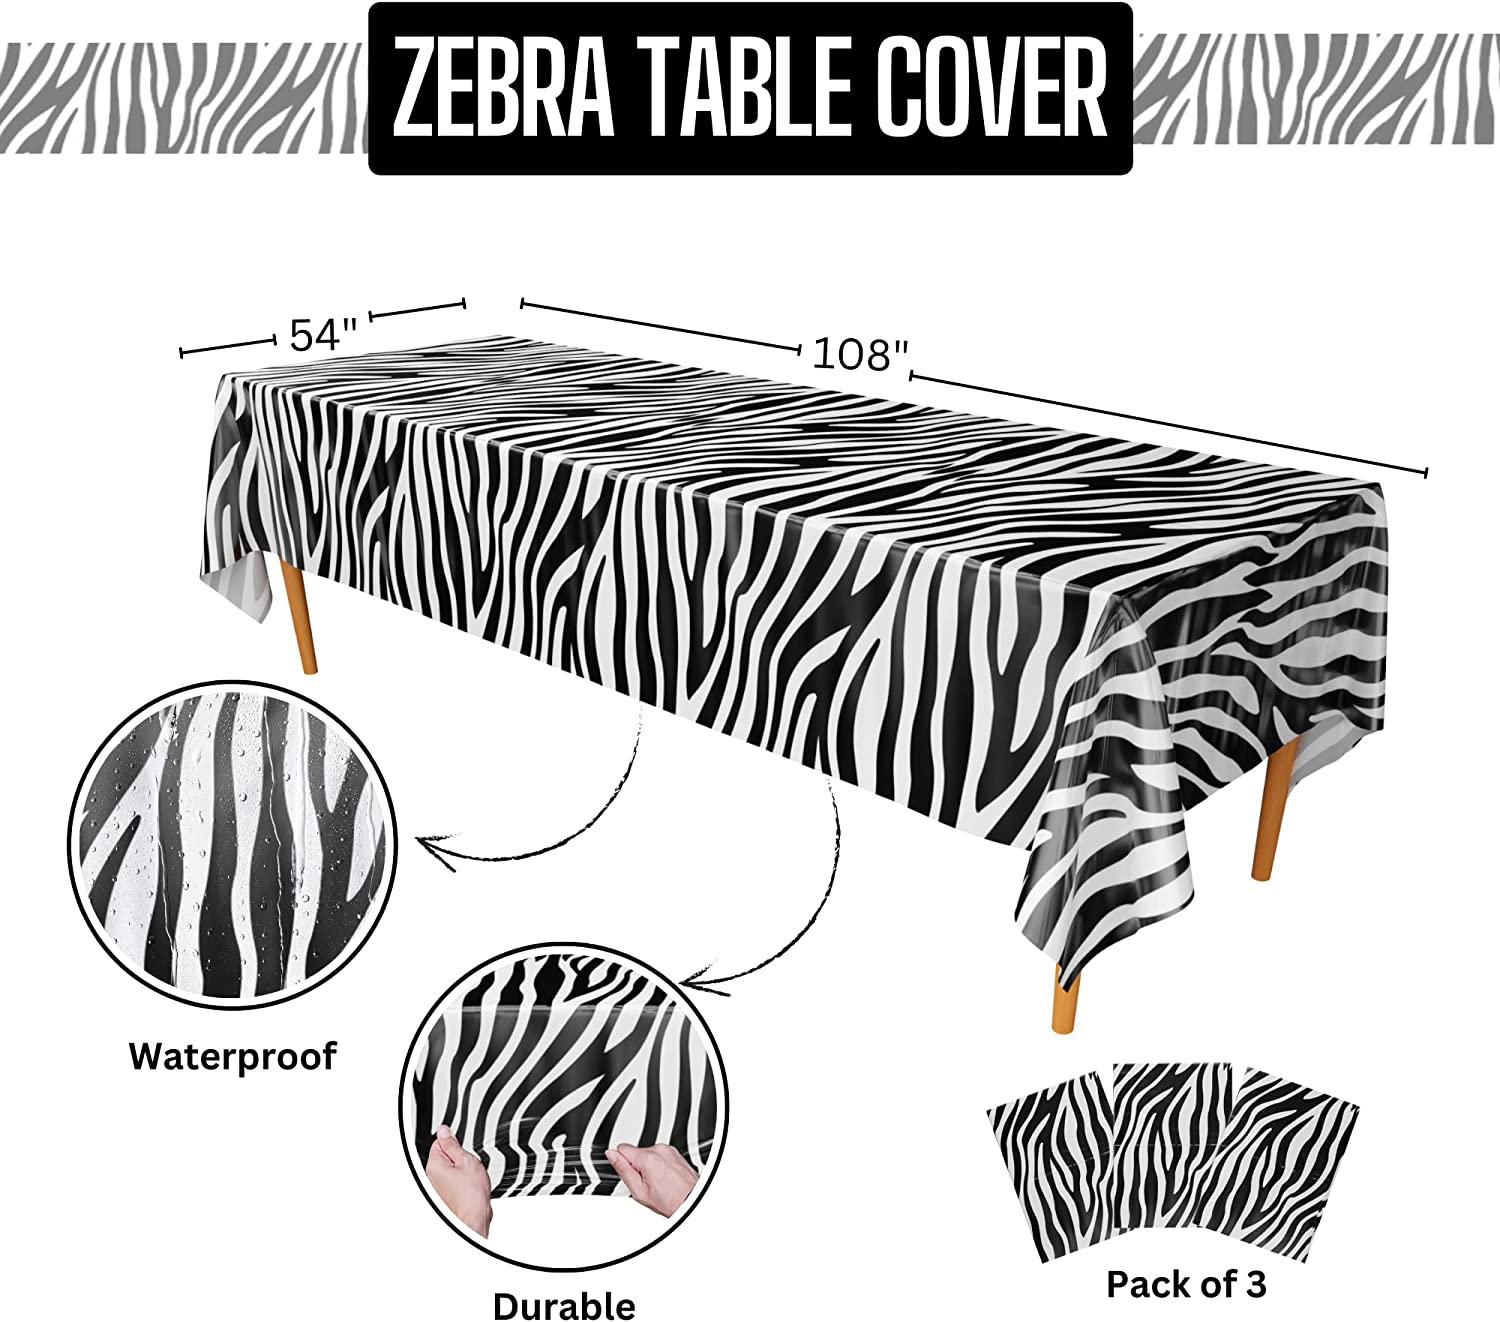 A waterproof and durable table covers feature a striking black and white zebra print design, resembling the pattern of a zebra's stripes.